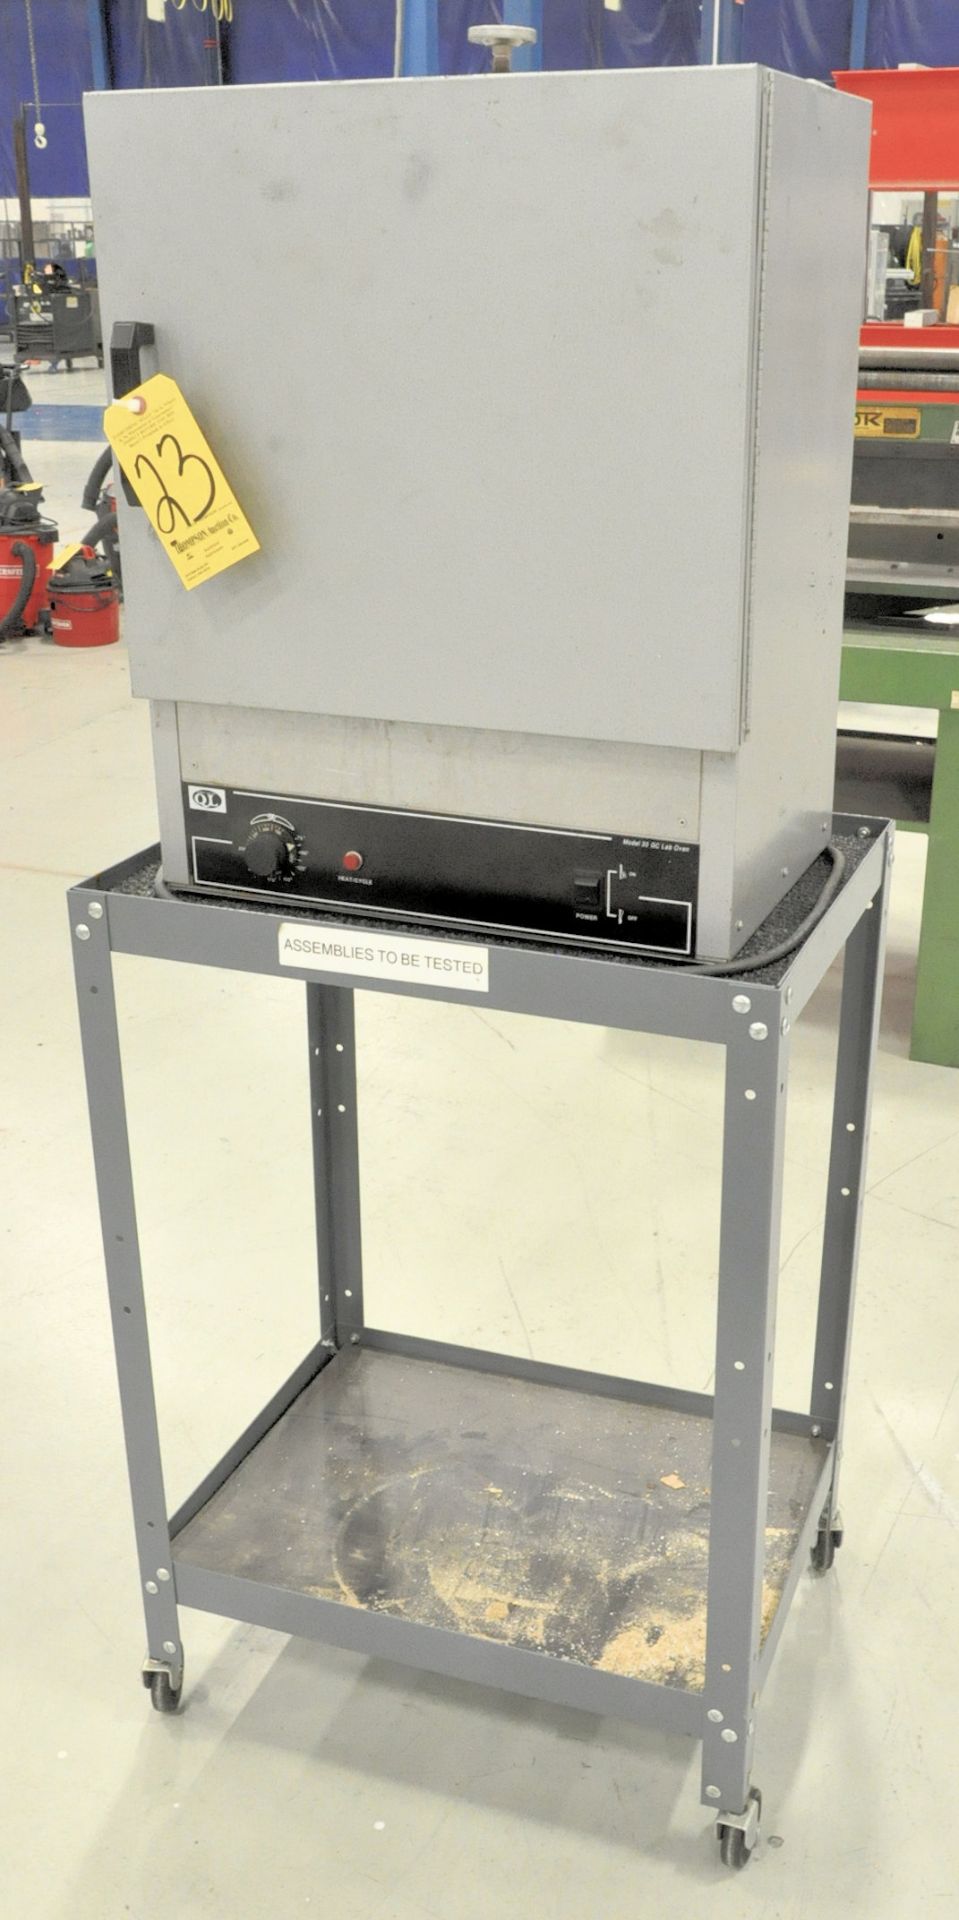 Quincy Lab Model 30 GC, Approximately 450-Degree Fahrenheit Single Door Bench Top Lab Oven, S/n G3-